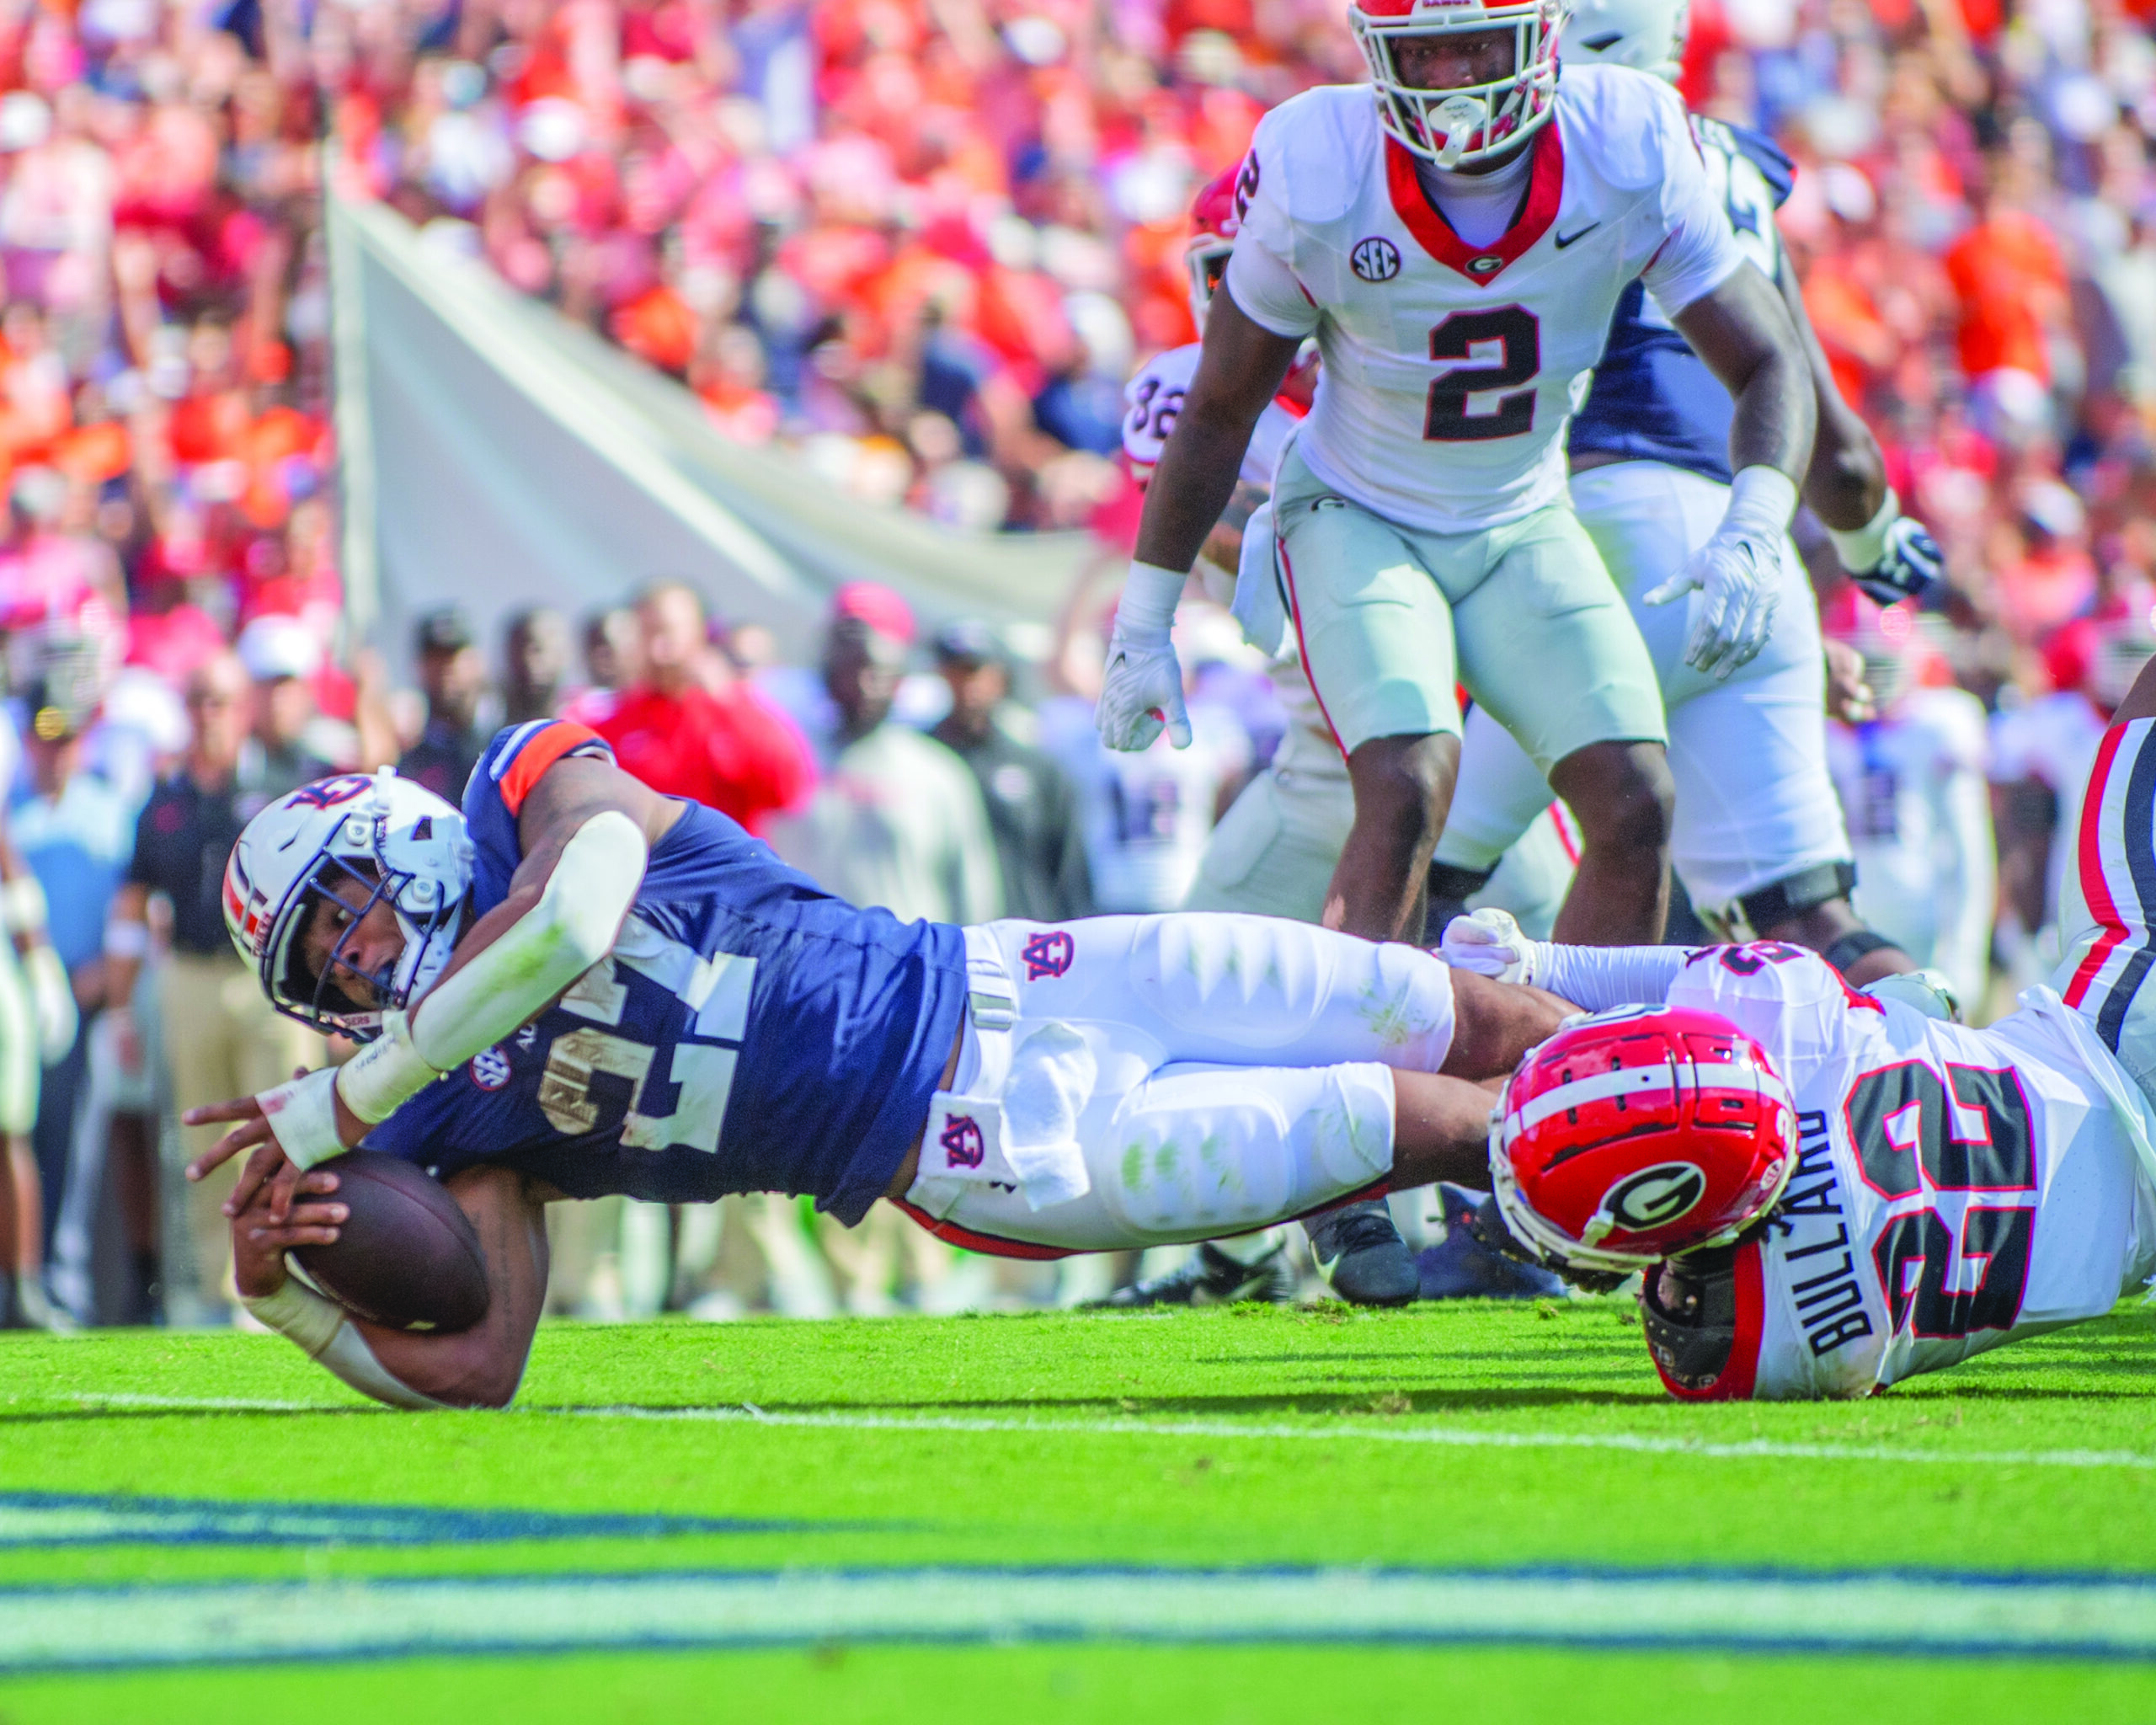 Auburn's Jarquez Hunter finds the endzone for a touchdown during Saturday's game.